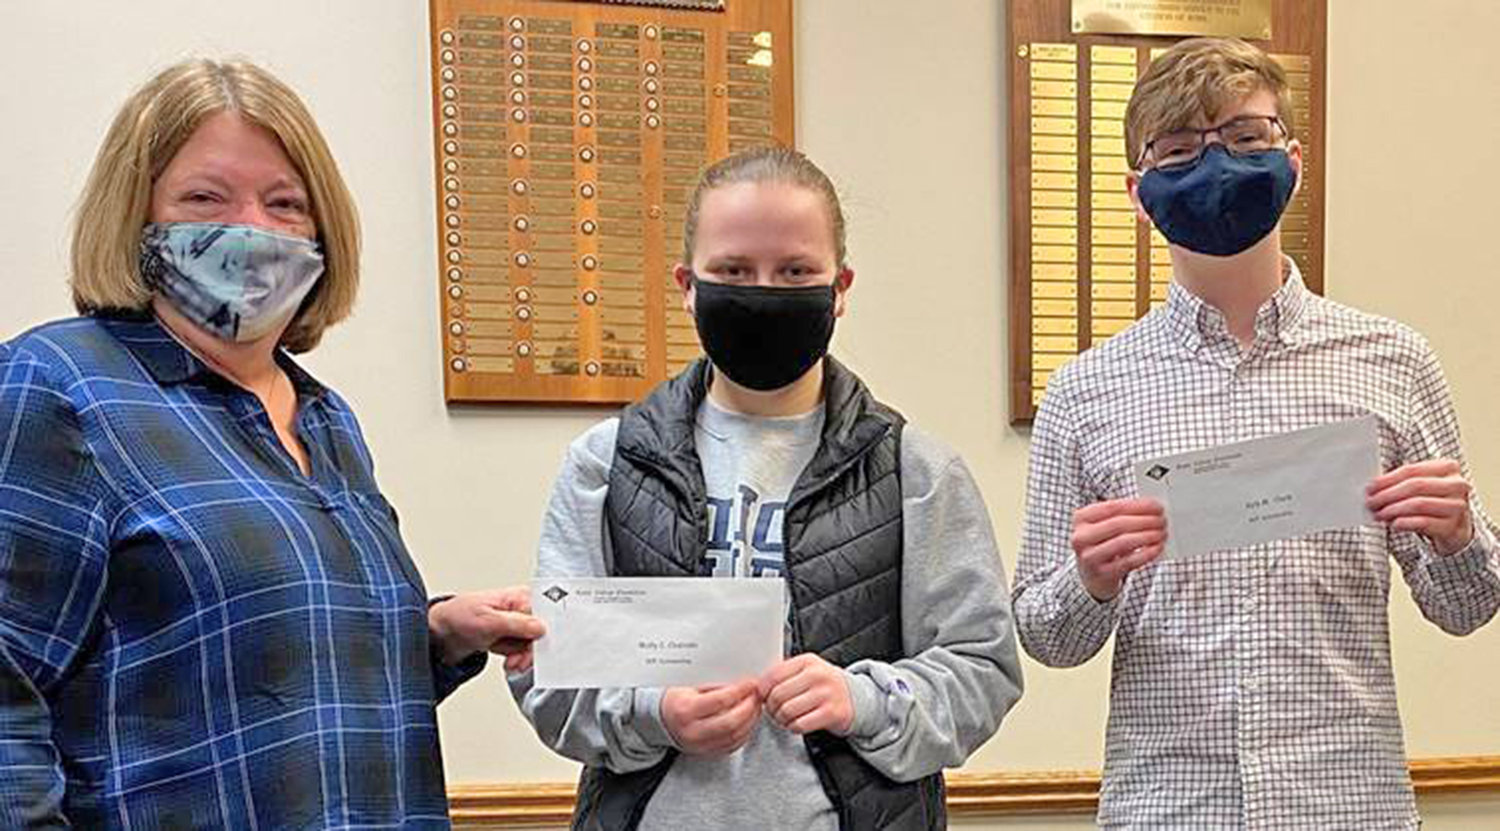 LOCAL SCHOLARS — Suzanne Carvelli, president of the Rome College  Foundation, presents a pair of organization scholarships to Molly Closinski, a Utica College student; and Kyle Clark, who attends the SUNY Polytechnic  Institute.